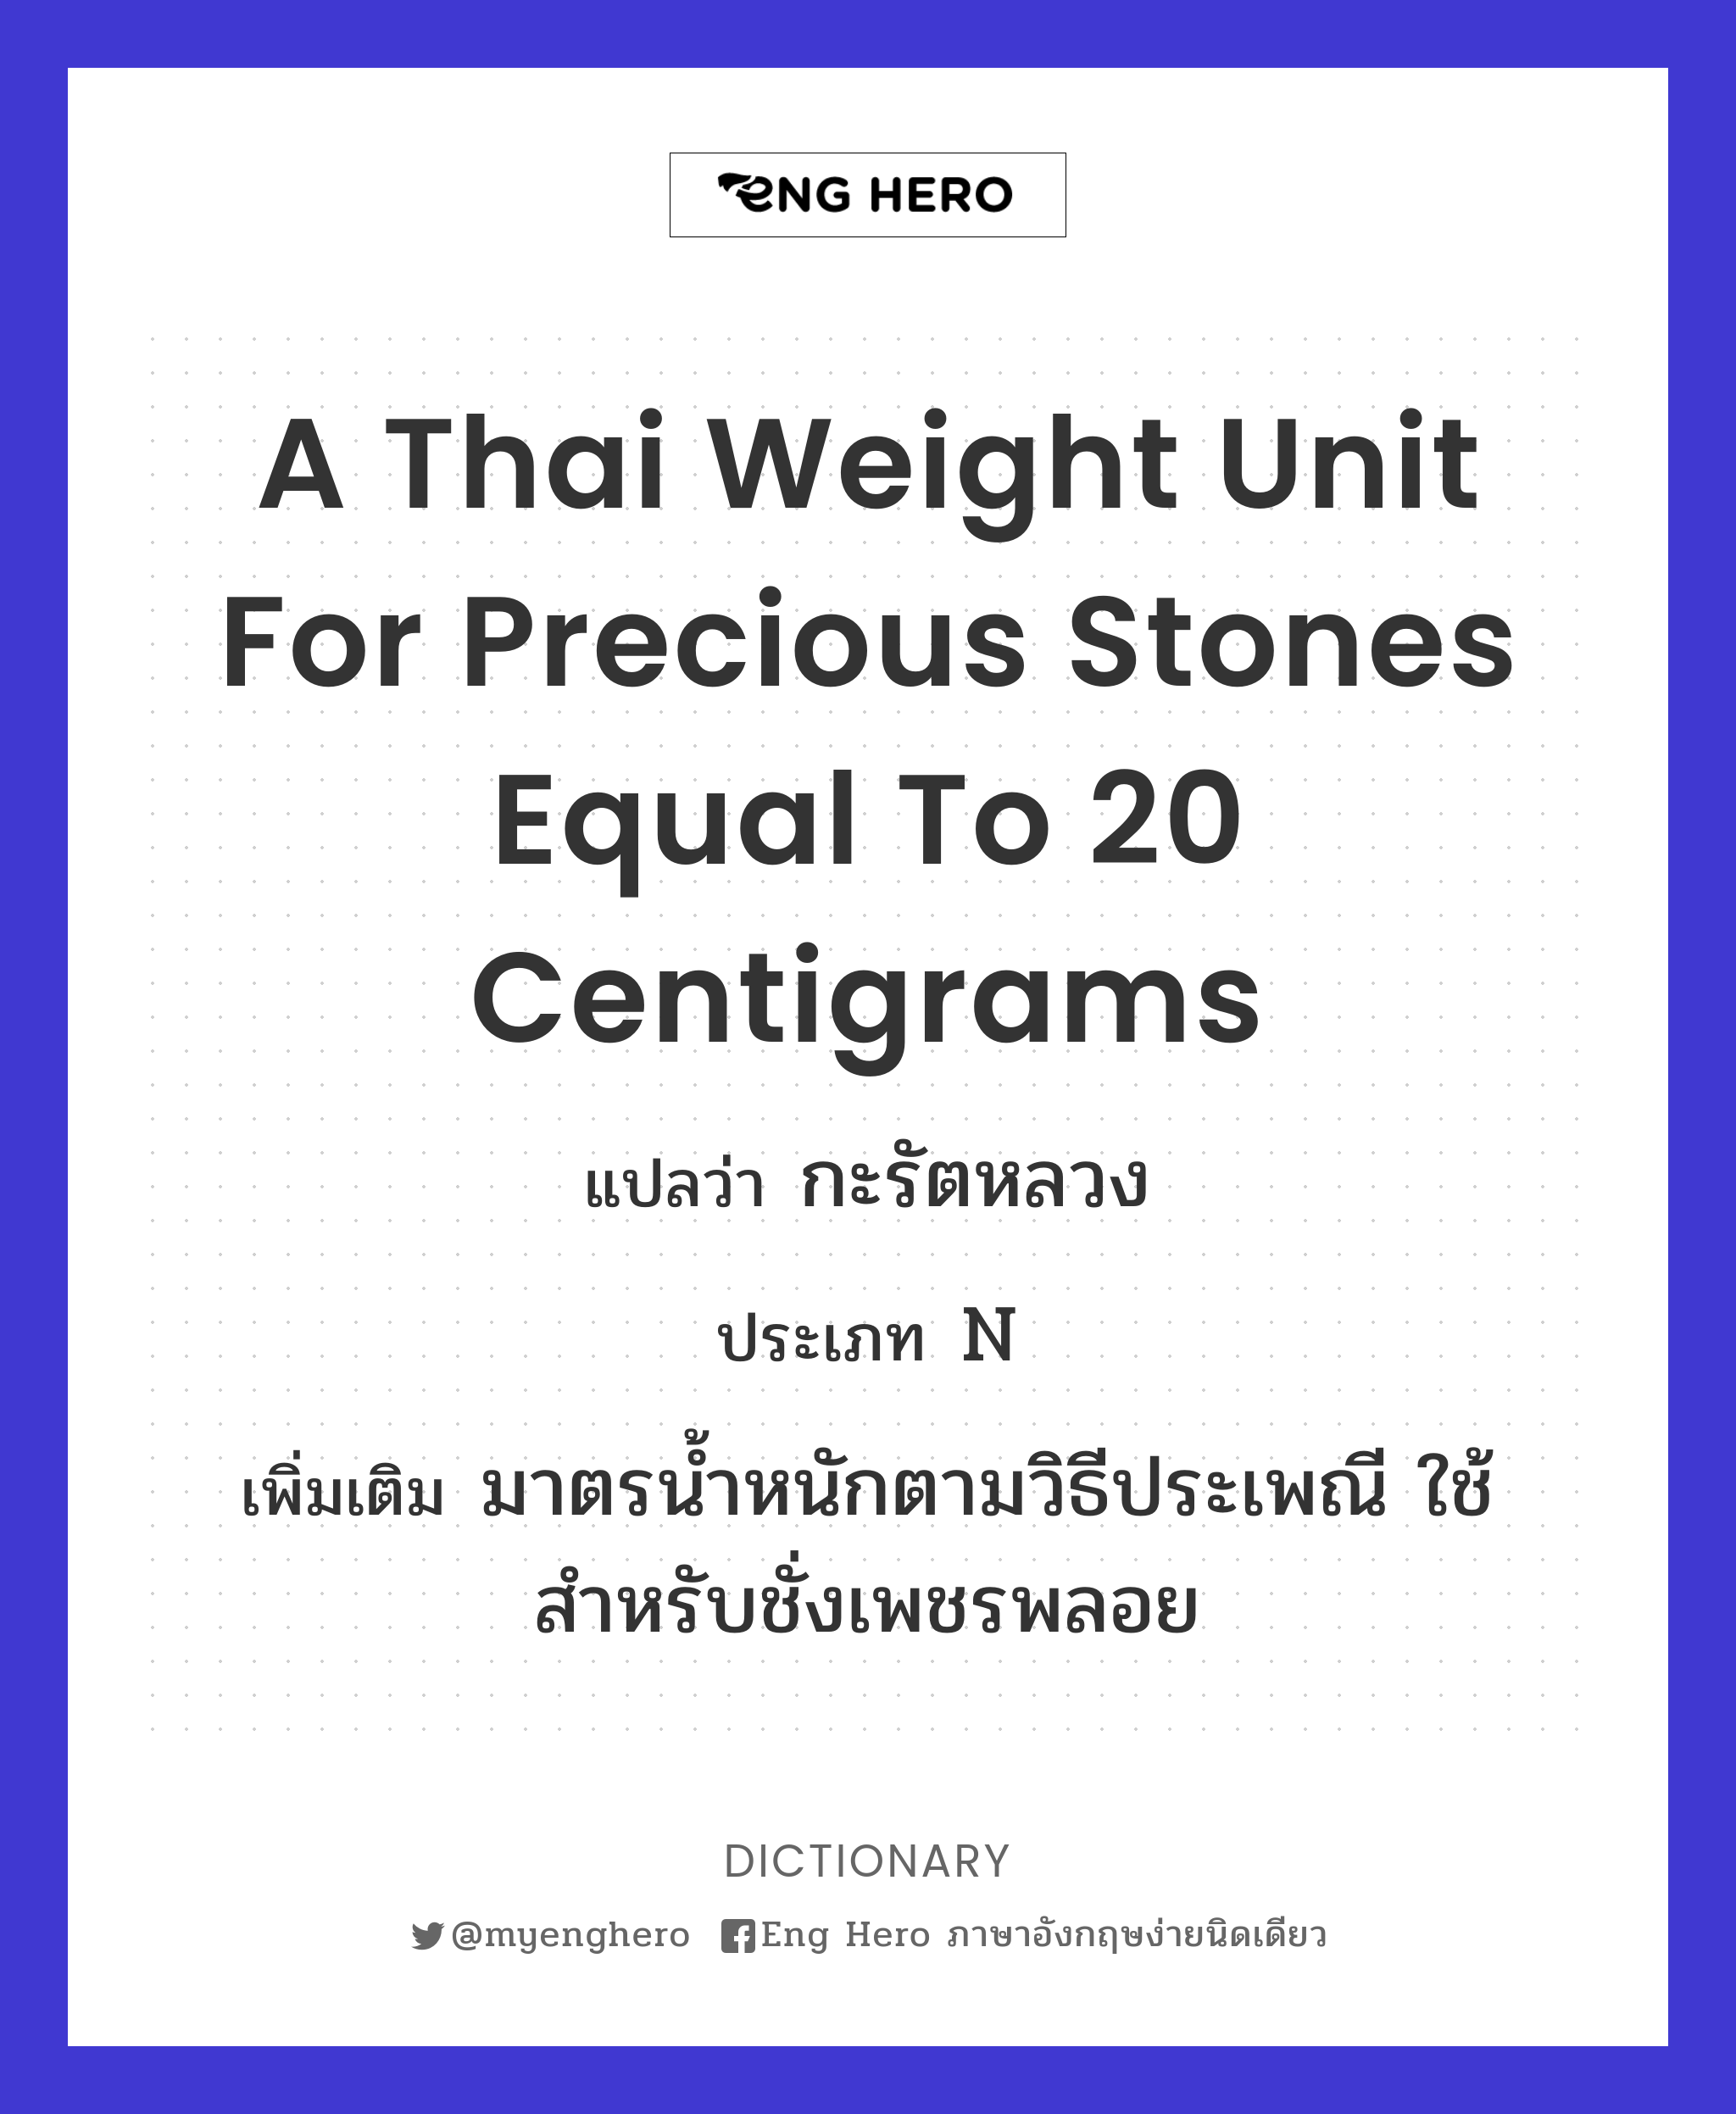 a Thai weight unit for precious stones equal to 20 centigrams